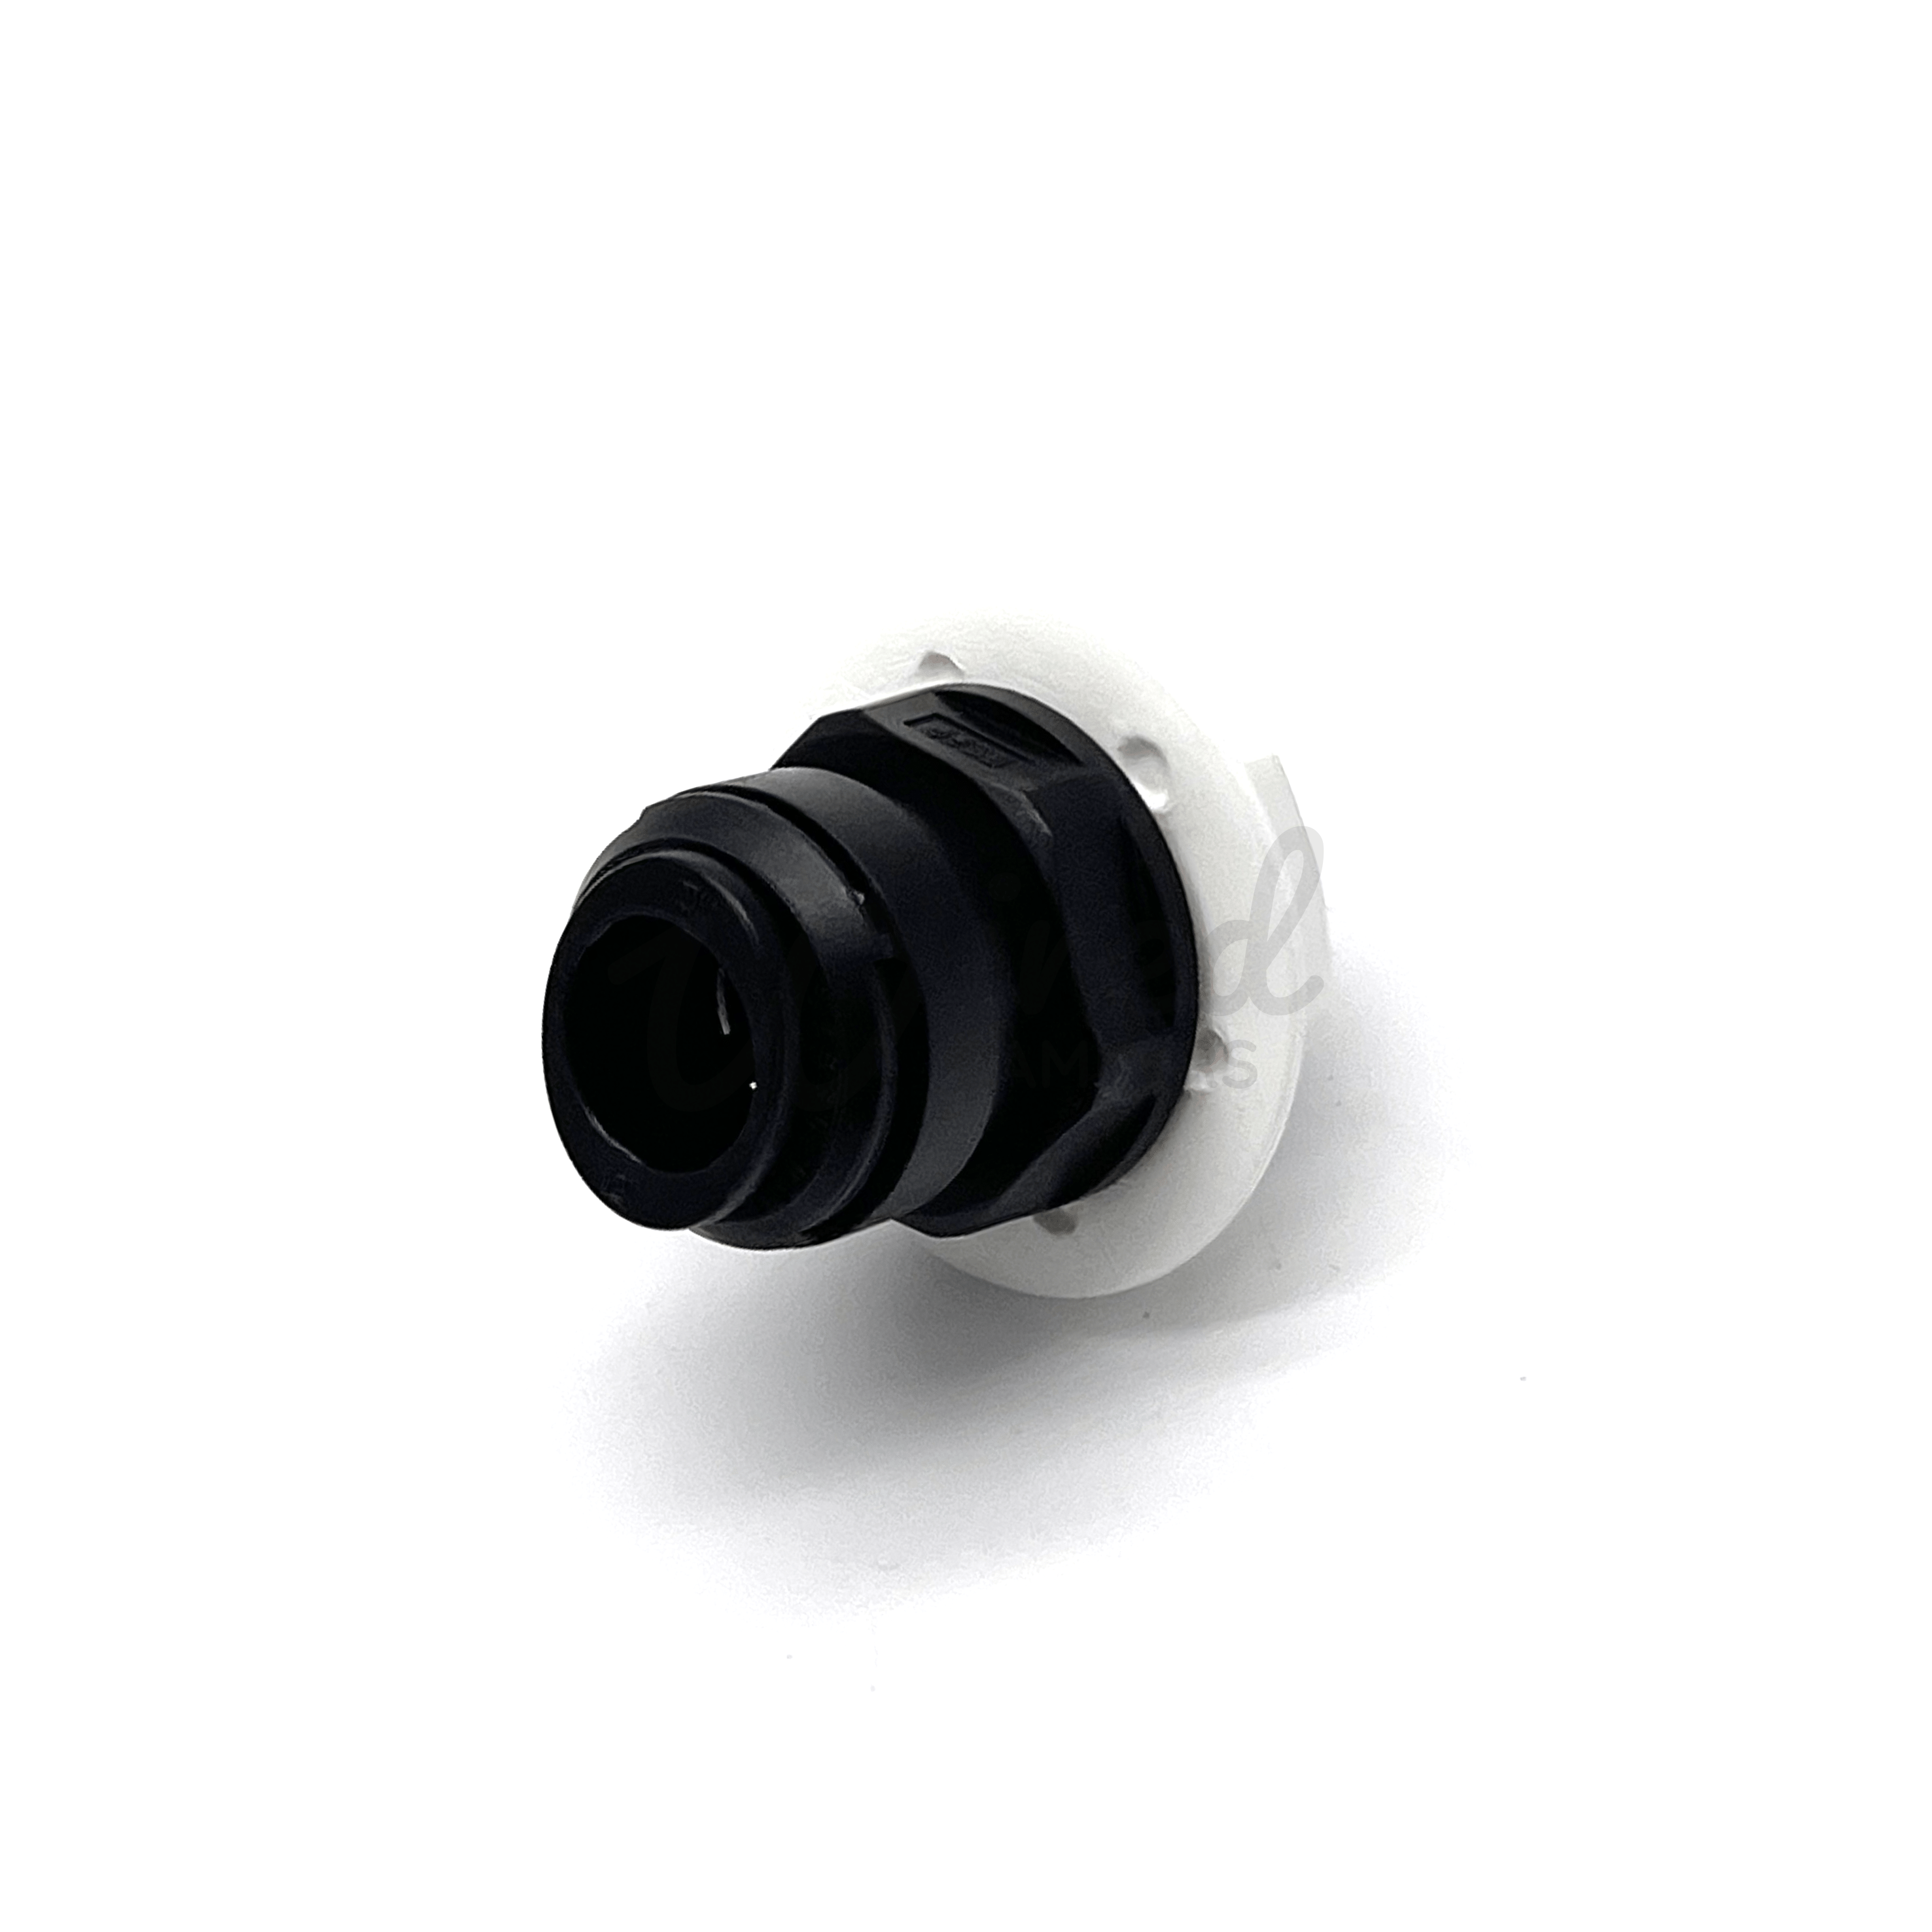 Wired Campers Limited W4 12MM Water Tank Connector - Compatible With John Guest Speedfit JG Push-Fit